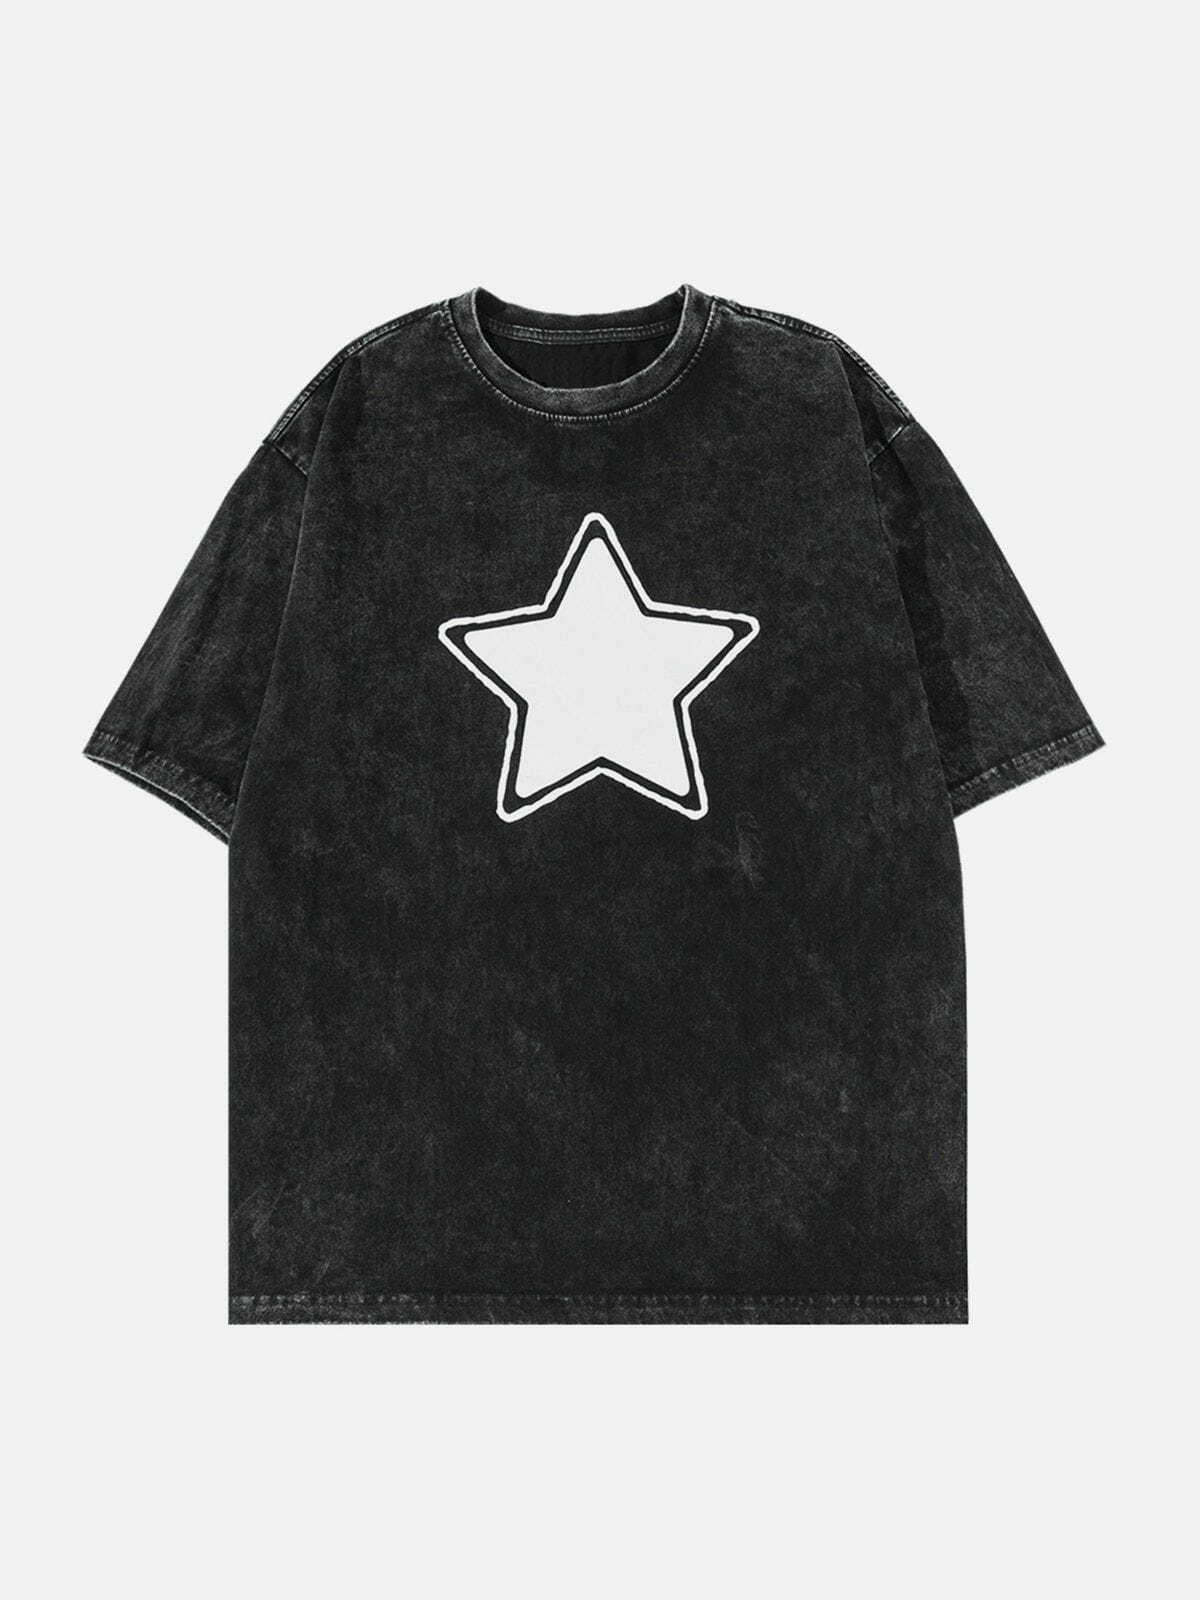 star print washed tee quirky cosmic streetwear 4075